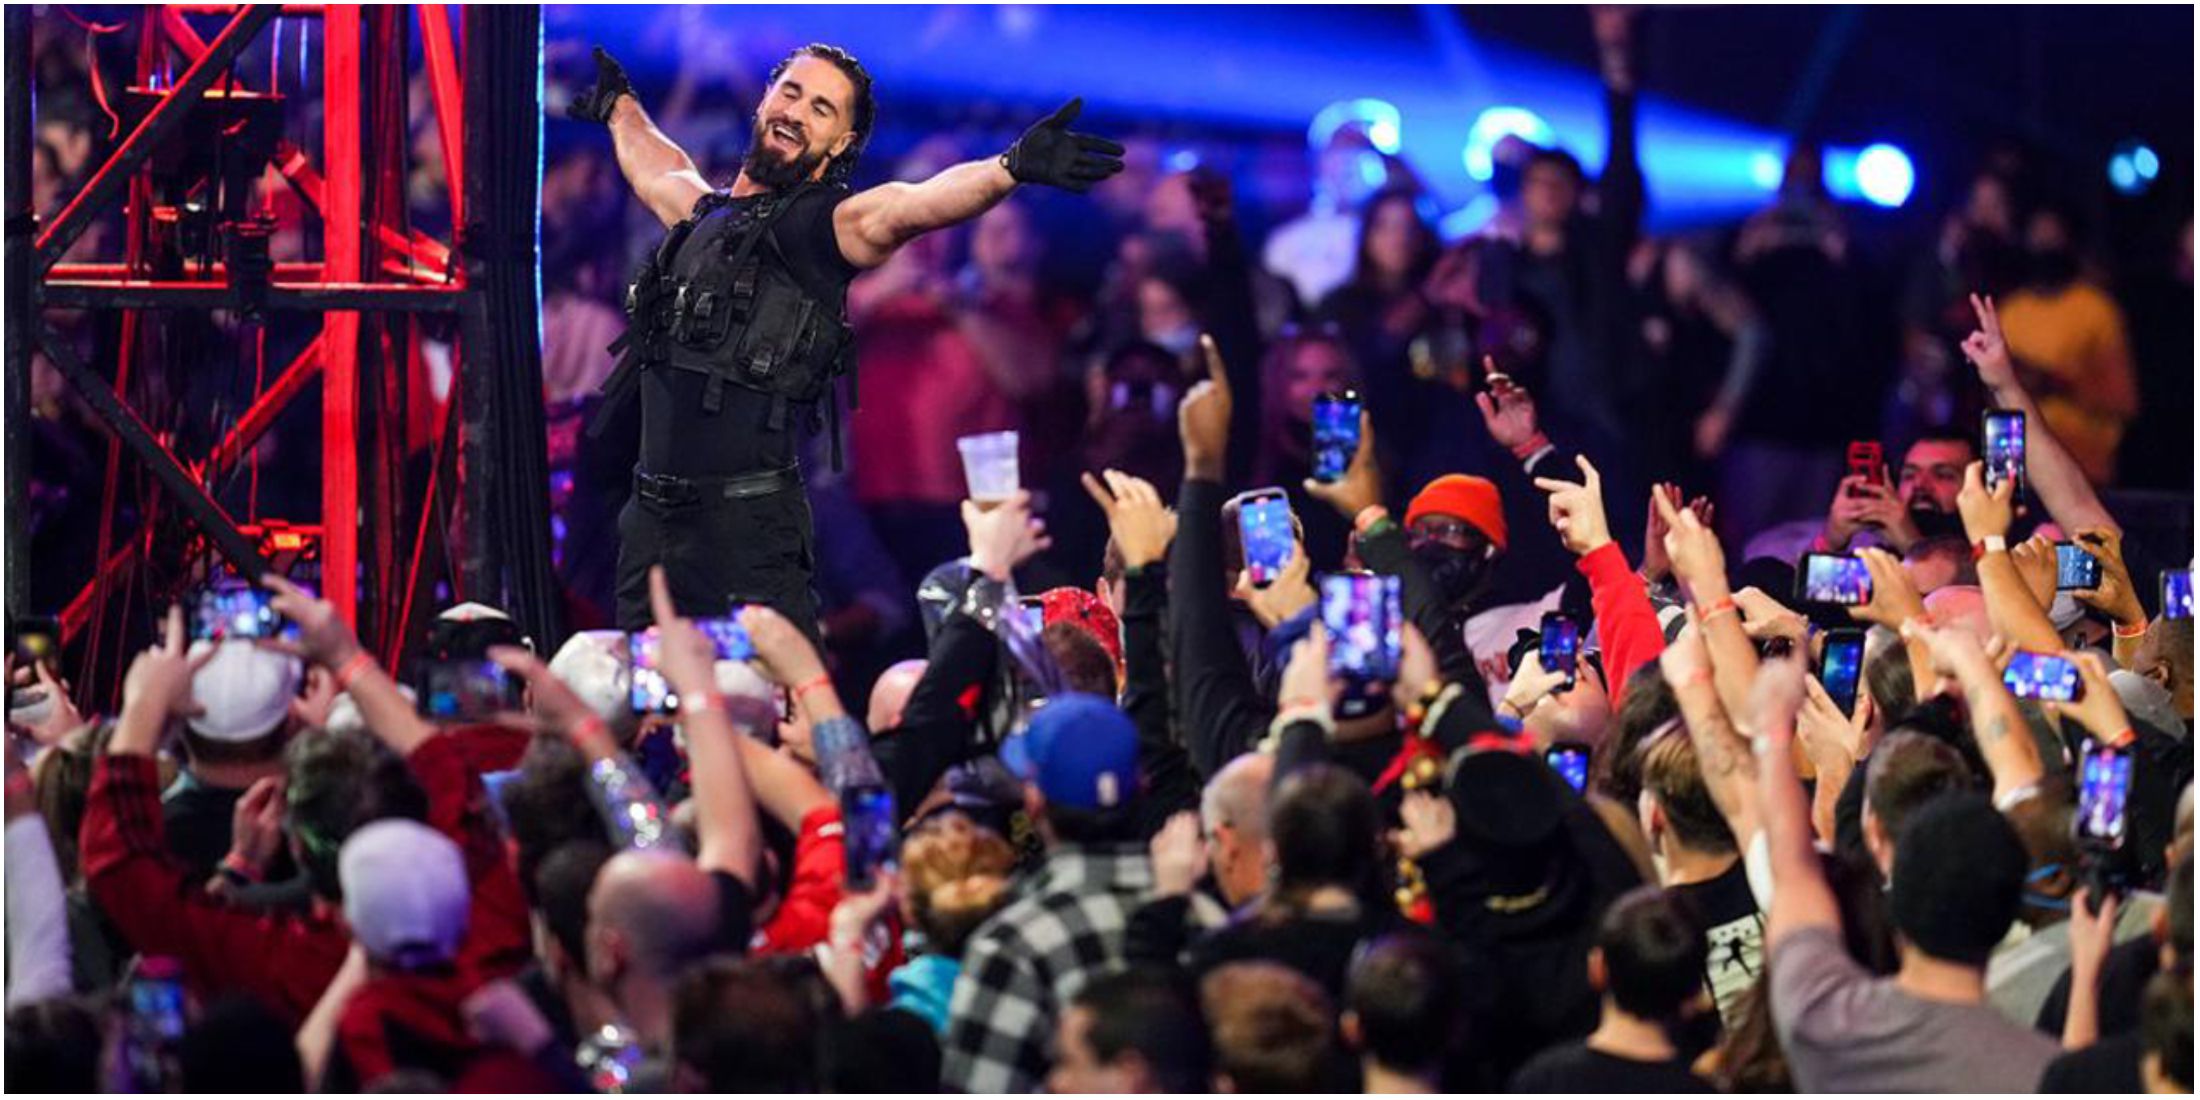 WWE Seth Rollins' brilliant entrance at the Royal Rumble was a